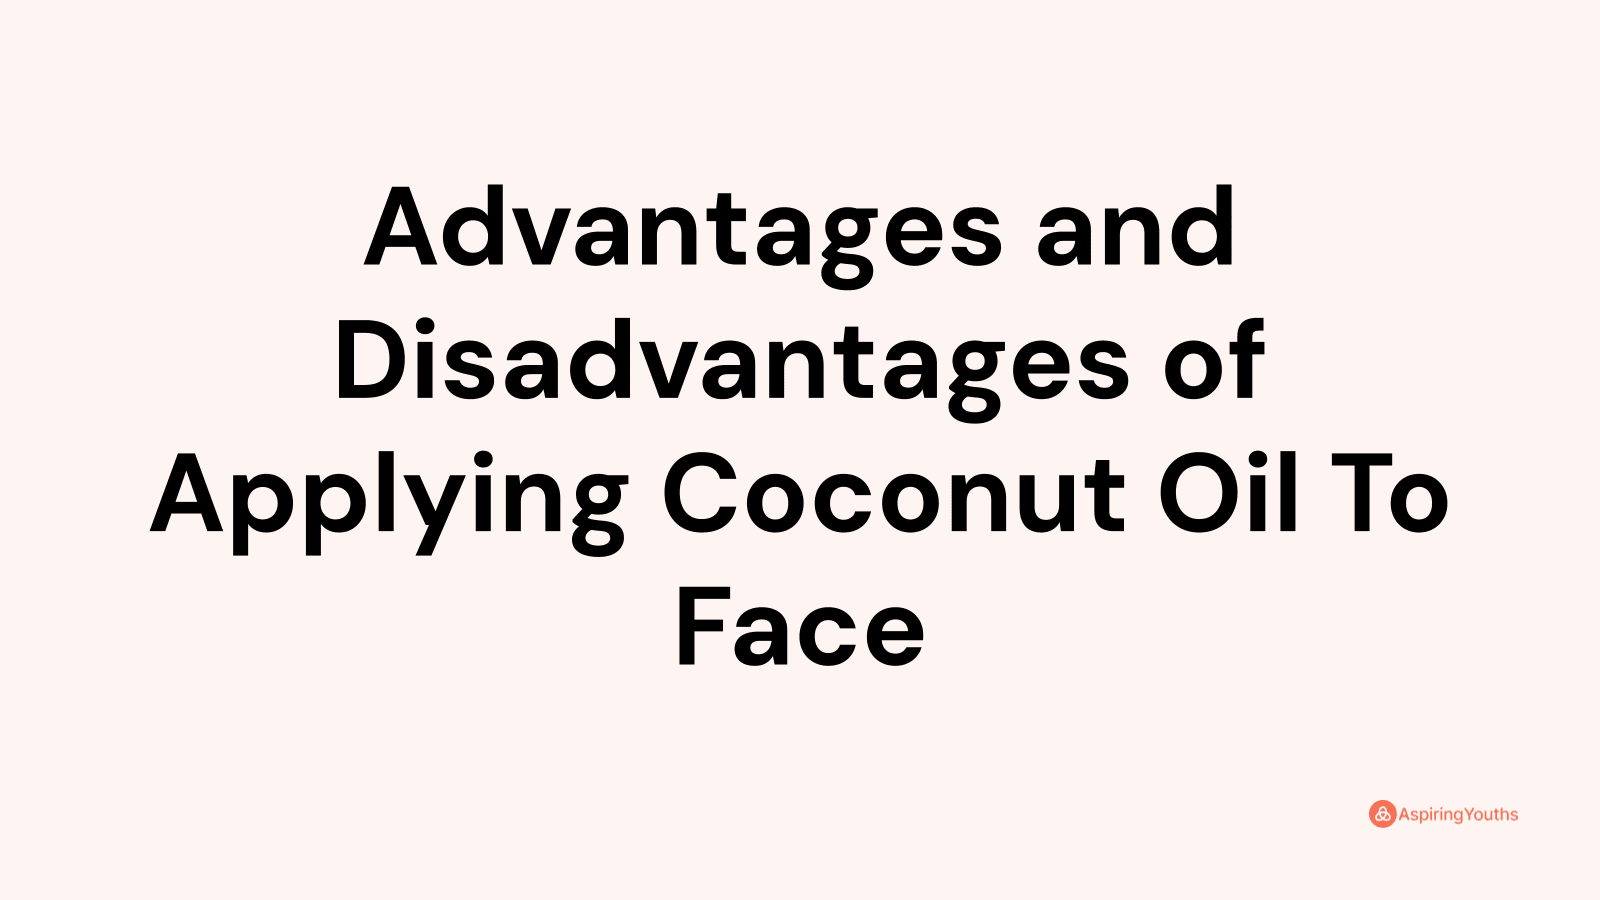 Advantages and disadvantages of Applying Coconut Oil To Face